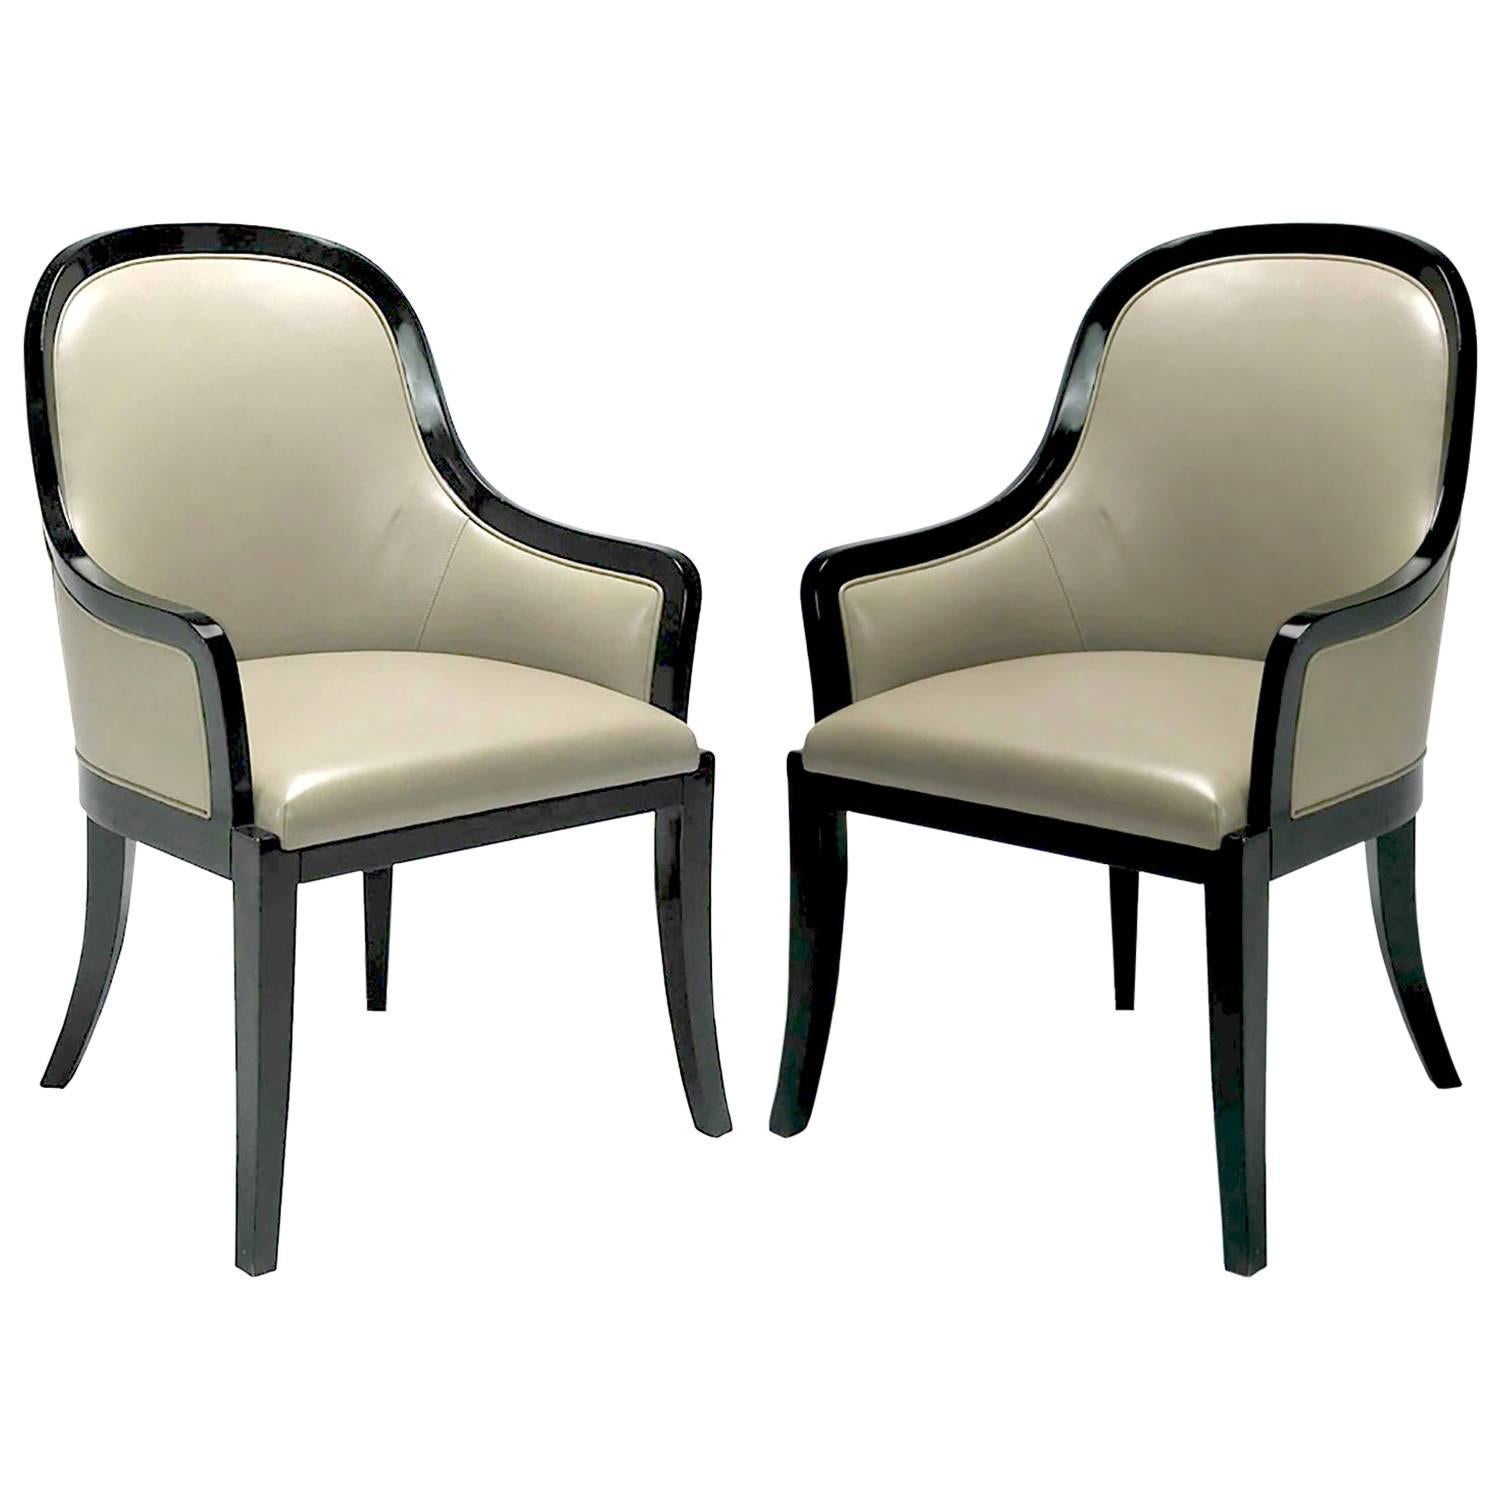 Pair of Karl Springer "Regina" Armchairs in Complementary Leather